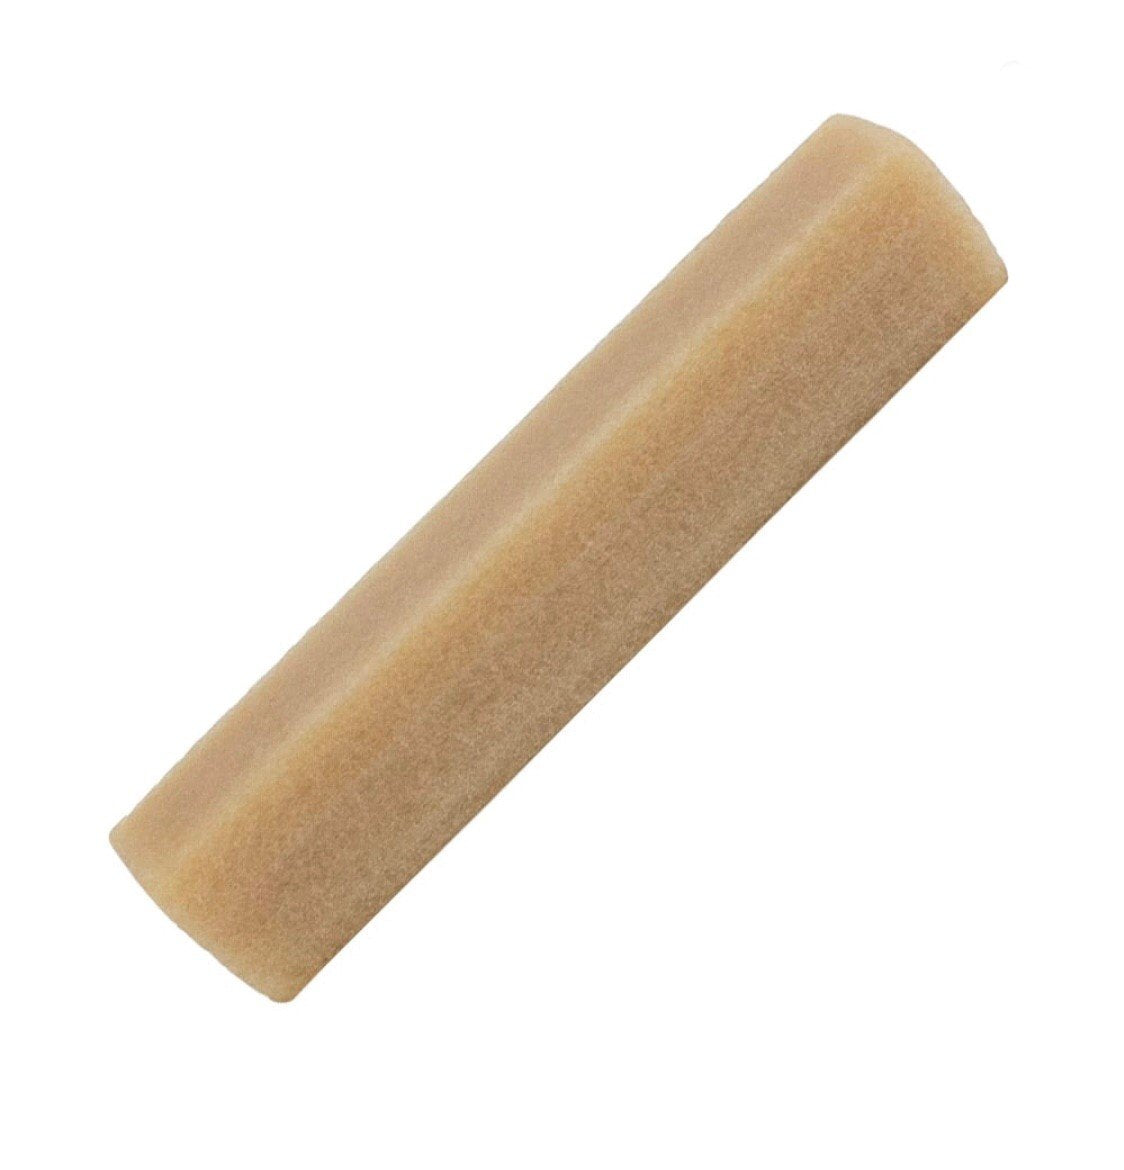 SuperMax Abrasive Cleaning Stick 59120